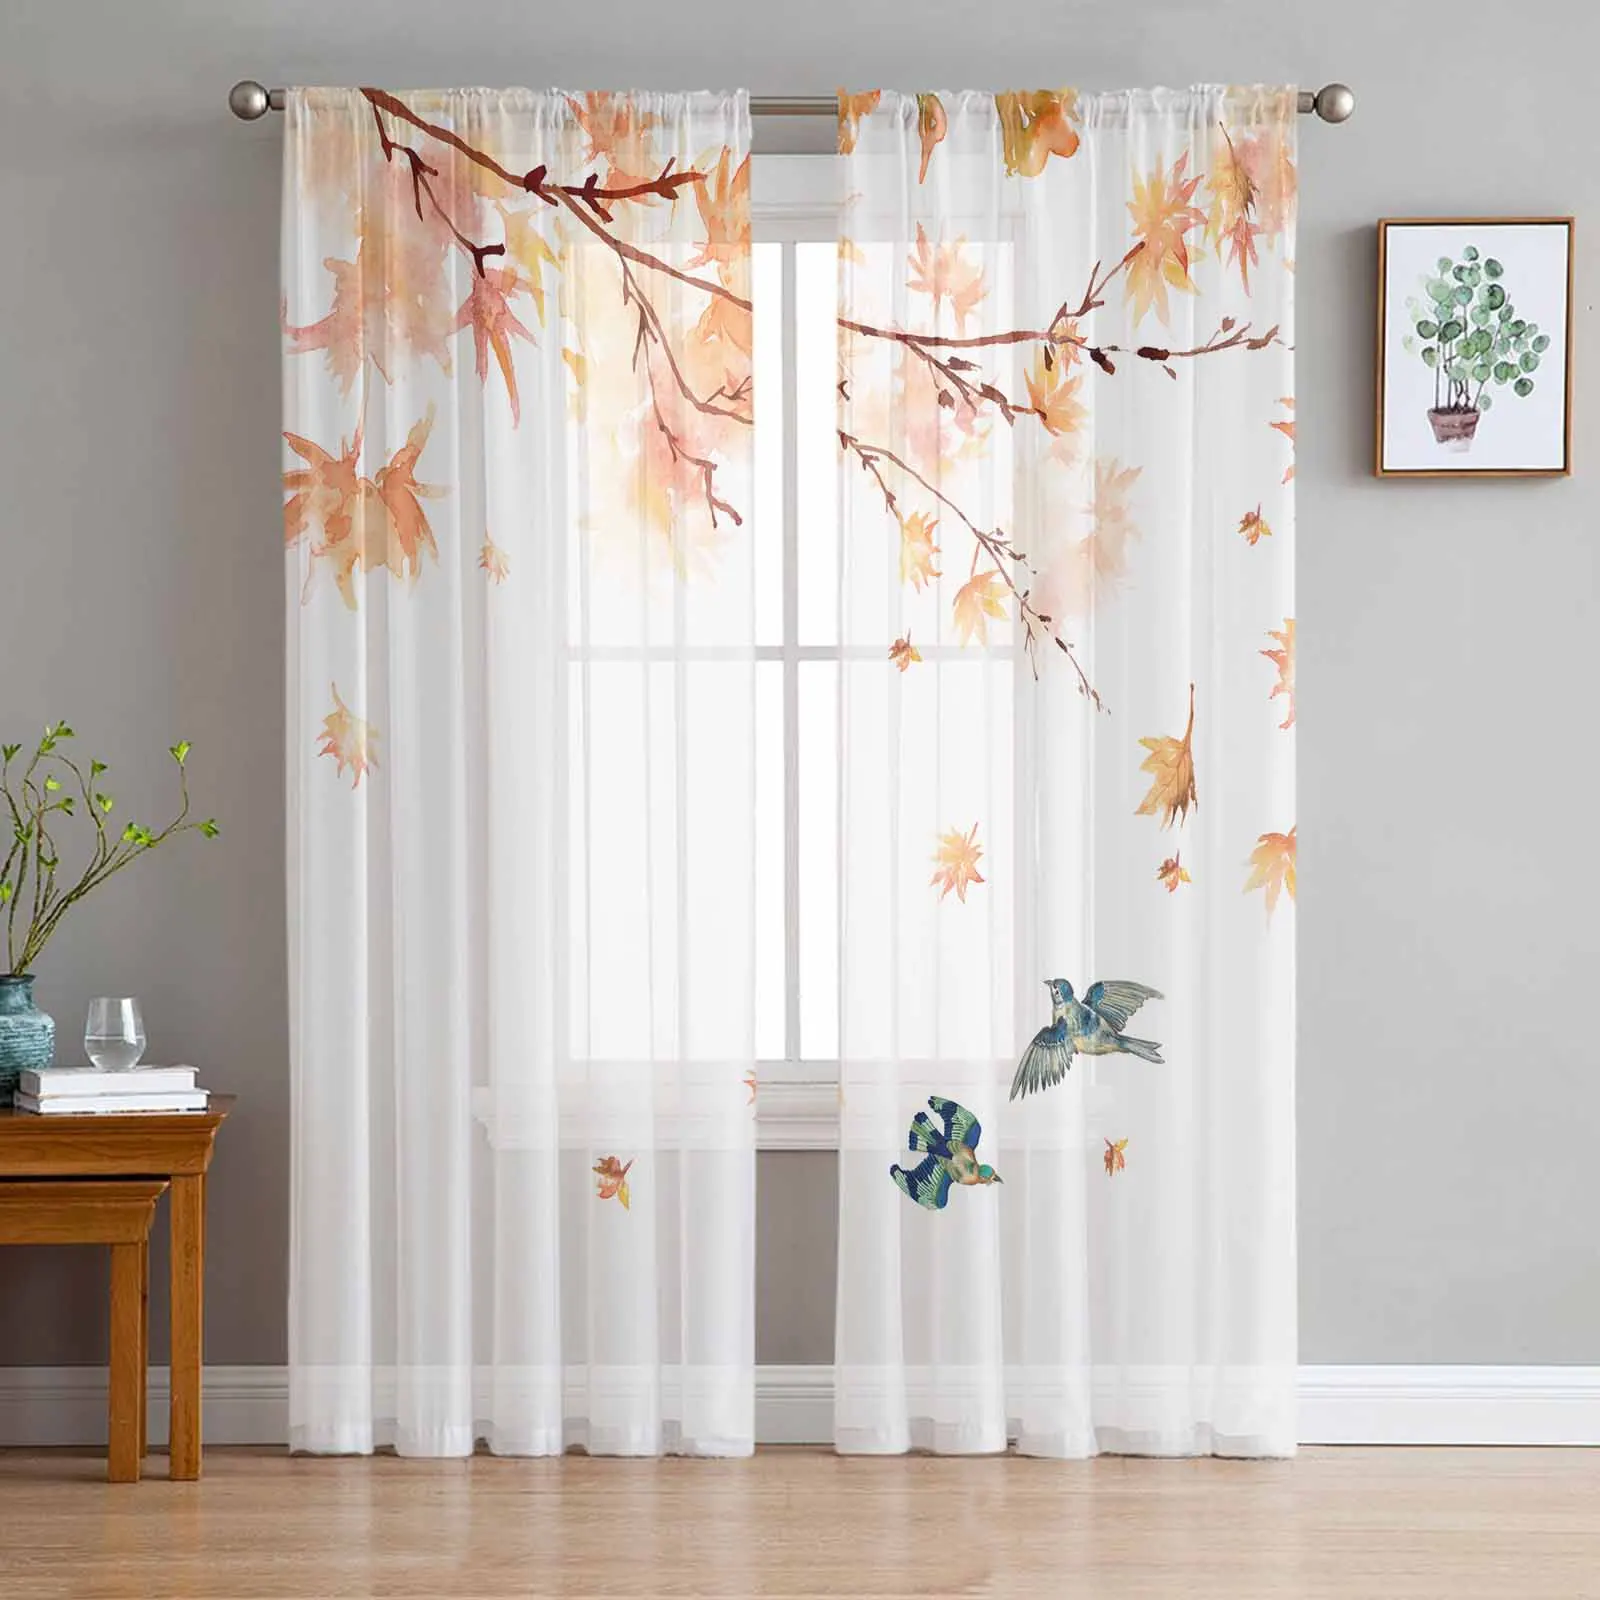 

Maple Branches Birds Animals Plants Watercolors Sheer Curtains for Living Room Home Decor Tulle Curtain Bedroom Voile Drapes